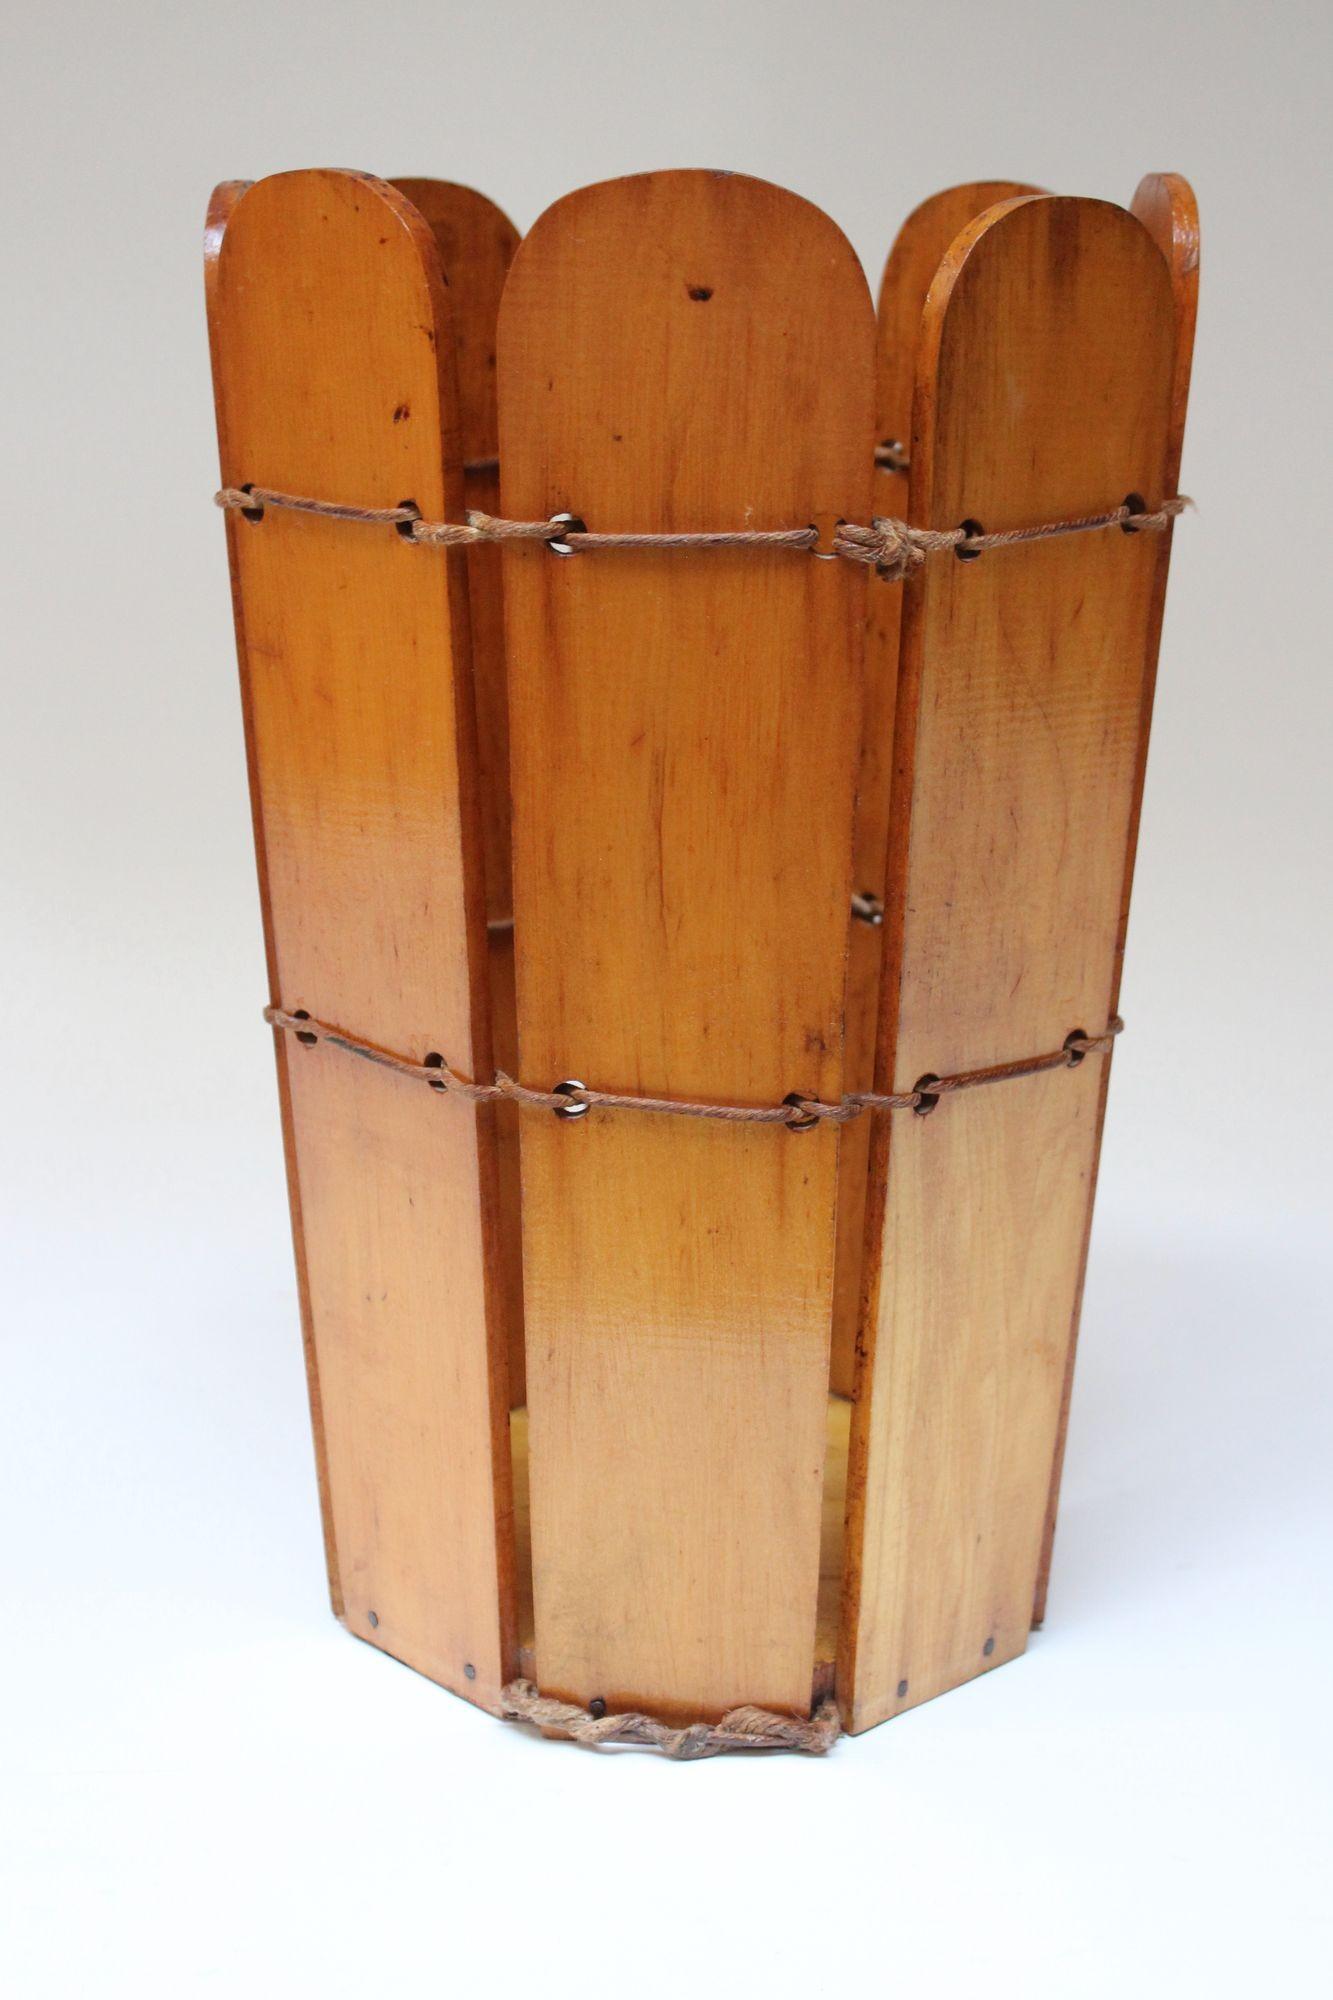 Craftsman/Adirondack style octagonal-form wastebasket (ca. 1930s, USA).
Composed of carved maple planks bound together with twine. Nails are all original and are good period examples.
Shows distressing/age-appropriate wear throughout (namely,